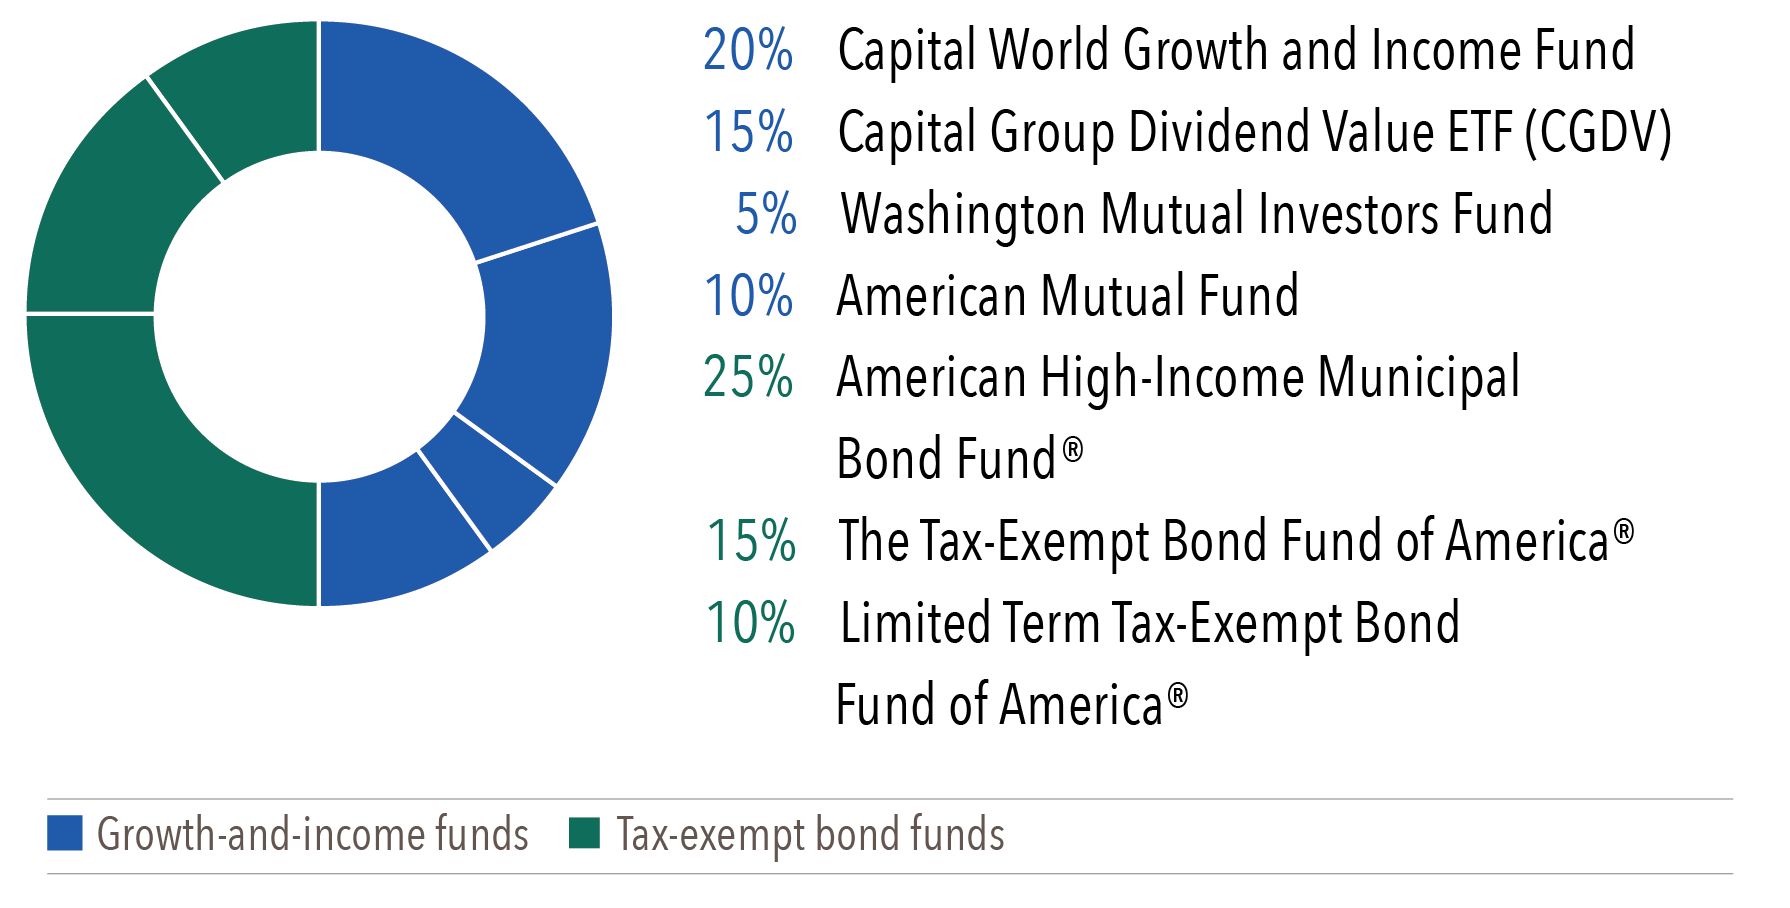 Donut chart displays a target allocation of 20% to Capital World Growth and Income Fund, 15% to Capital Group Dividend Value ETF (CGDV), 5% to Washington Mutual Investors Fund, 10% to American Mutual Fund, 25% to American High-Income Municipal Bond Fund, 15% to The Tax-Exempt Bond Fund of America, 10% to Limited Term Tax-Exempt Bond Fund of America.